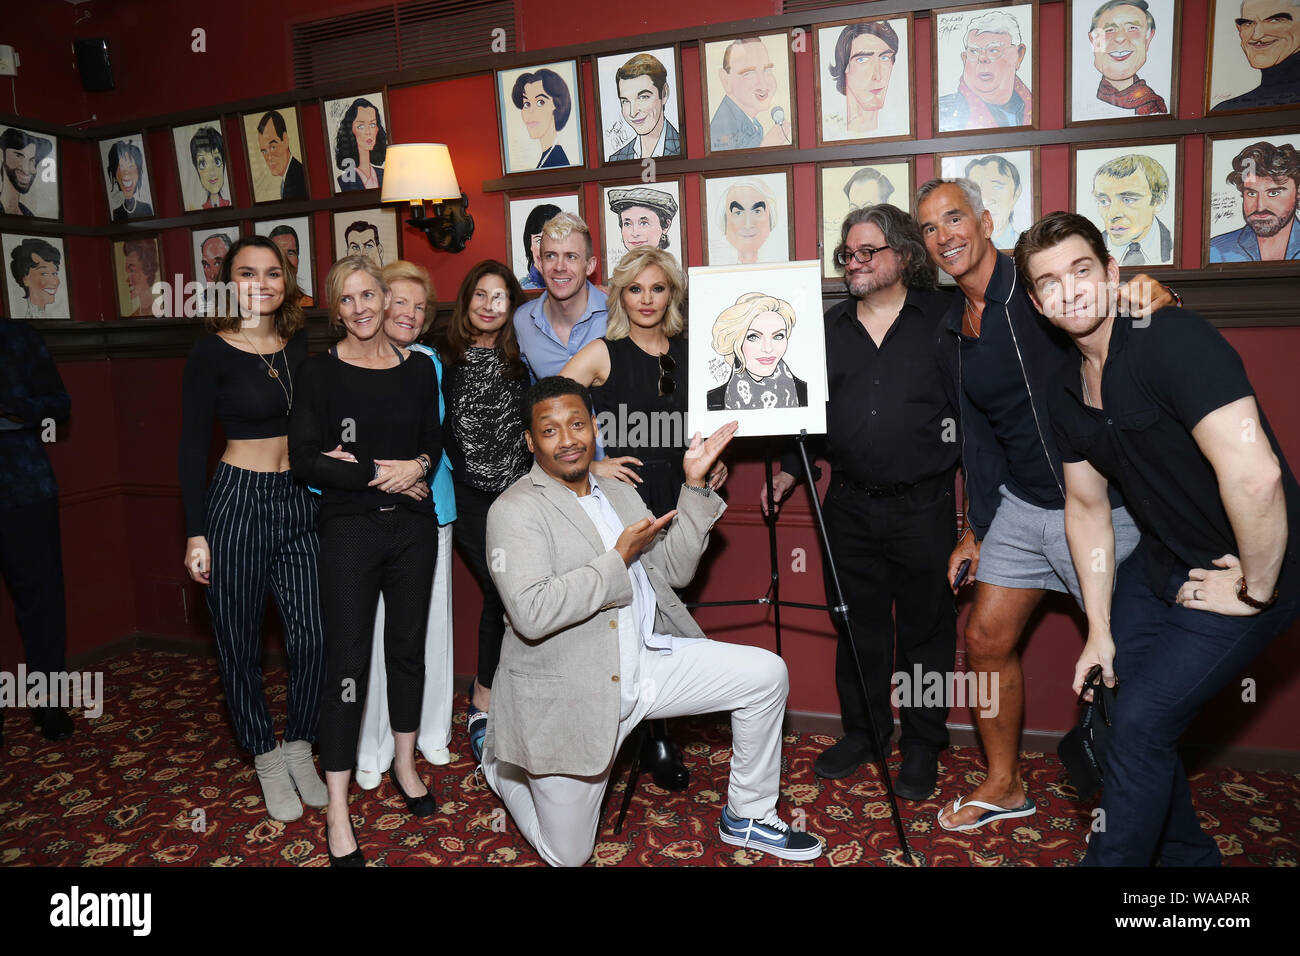 Tony award nominee Orfeh receives her portrait at Sardi's theatre district eatery. Featuring: Samantha Barks, Paula Wagner, Khalil Kain, Orfeh, Jerry Mitchell, Andy Karl, Guests Where: New York, New York, United States When: 19 Jul 2019 Credit: Joseph Marzullo/WENN.com Stock Photo